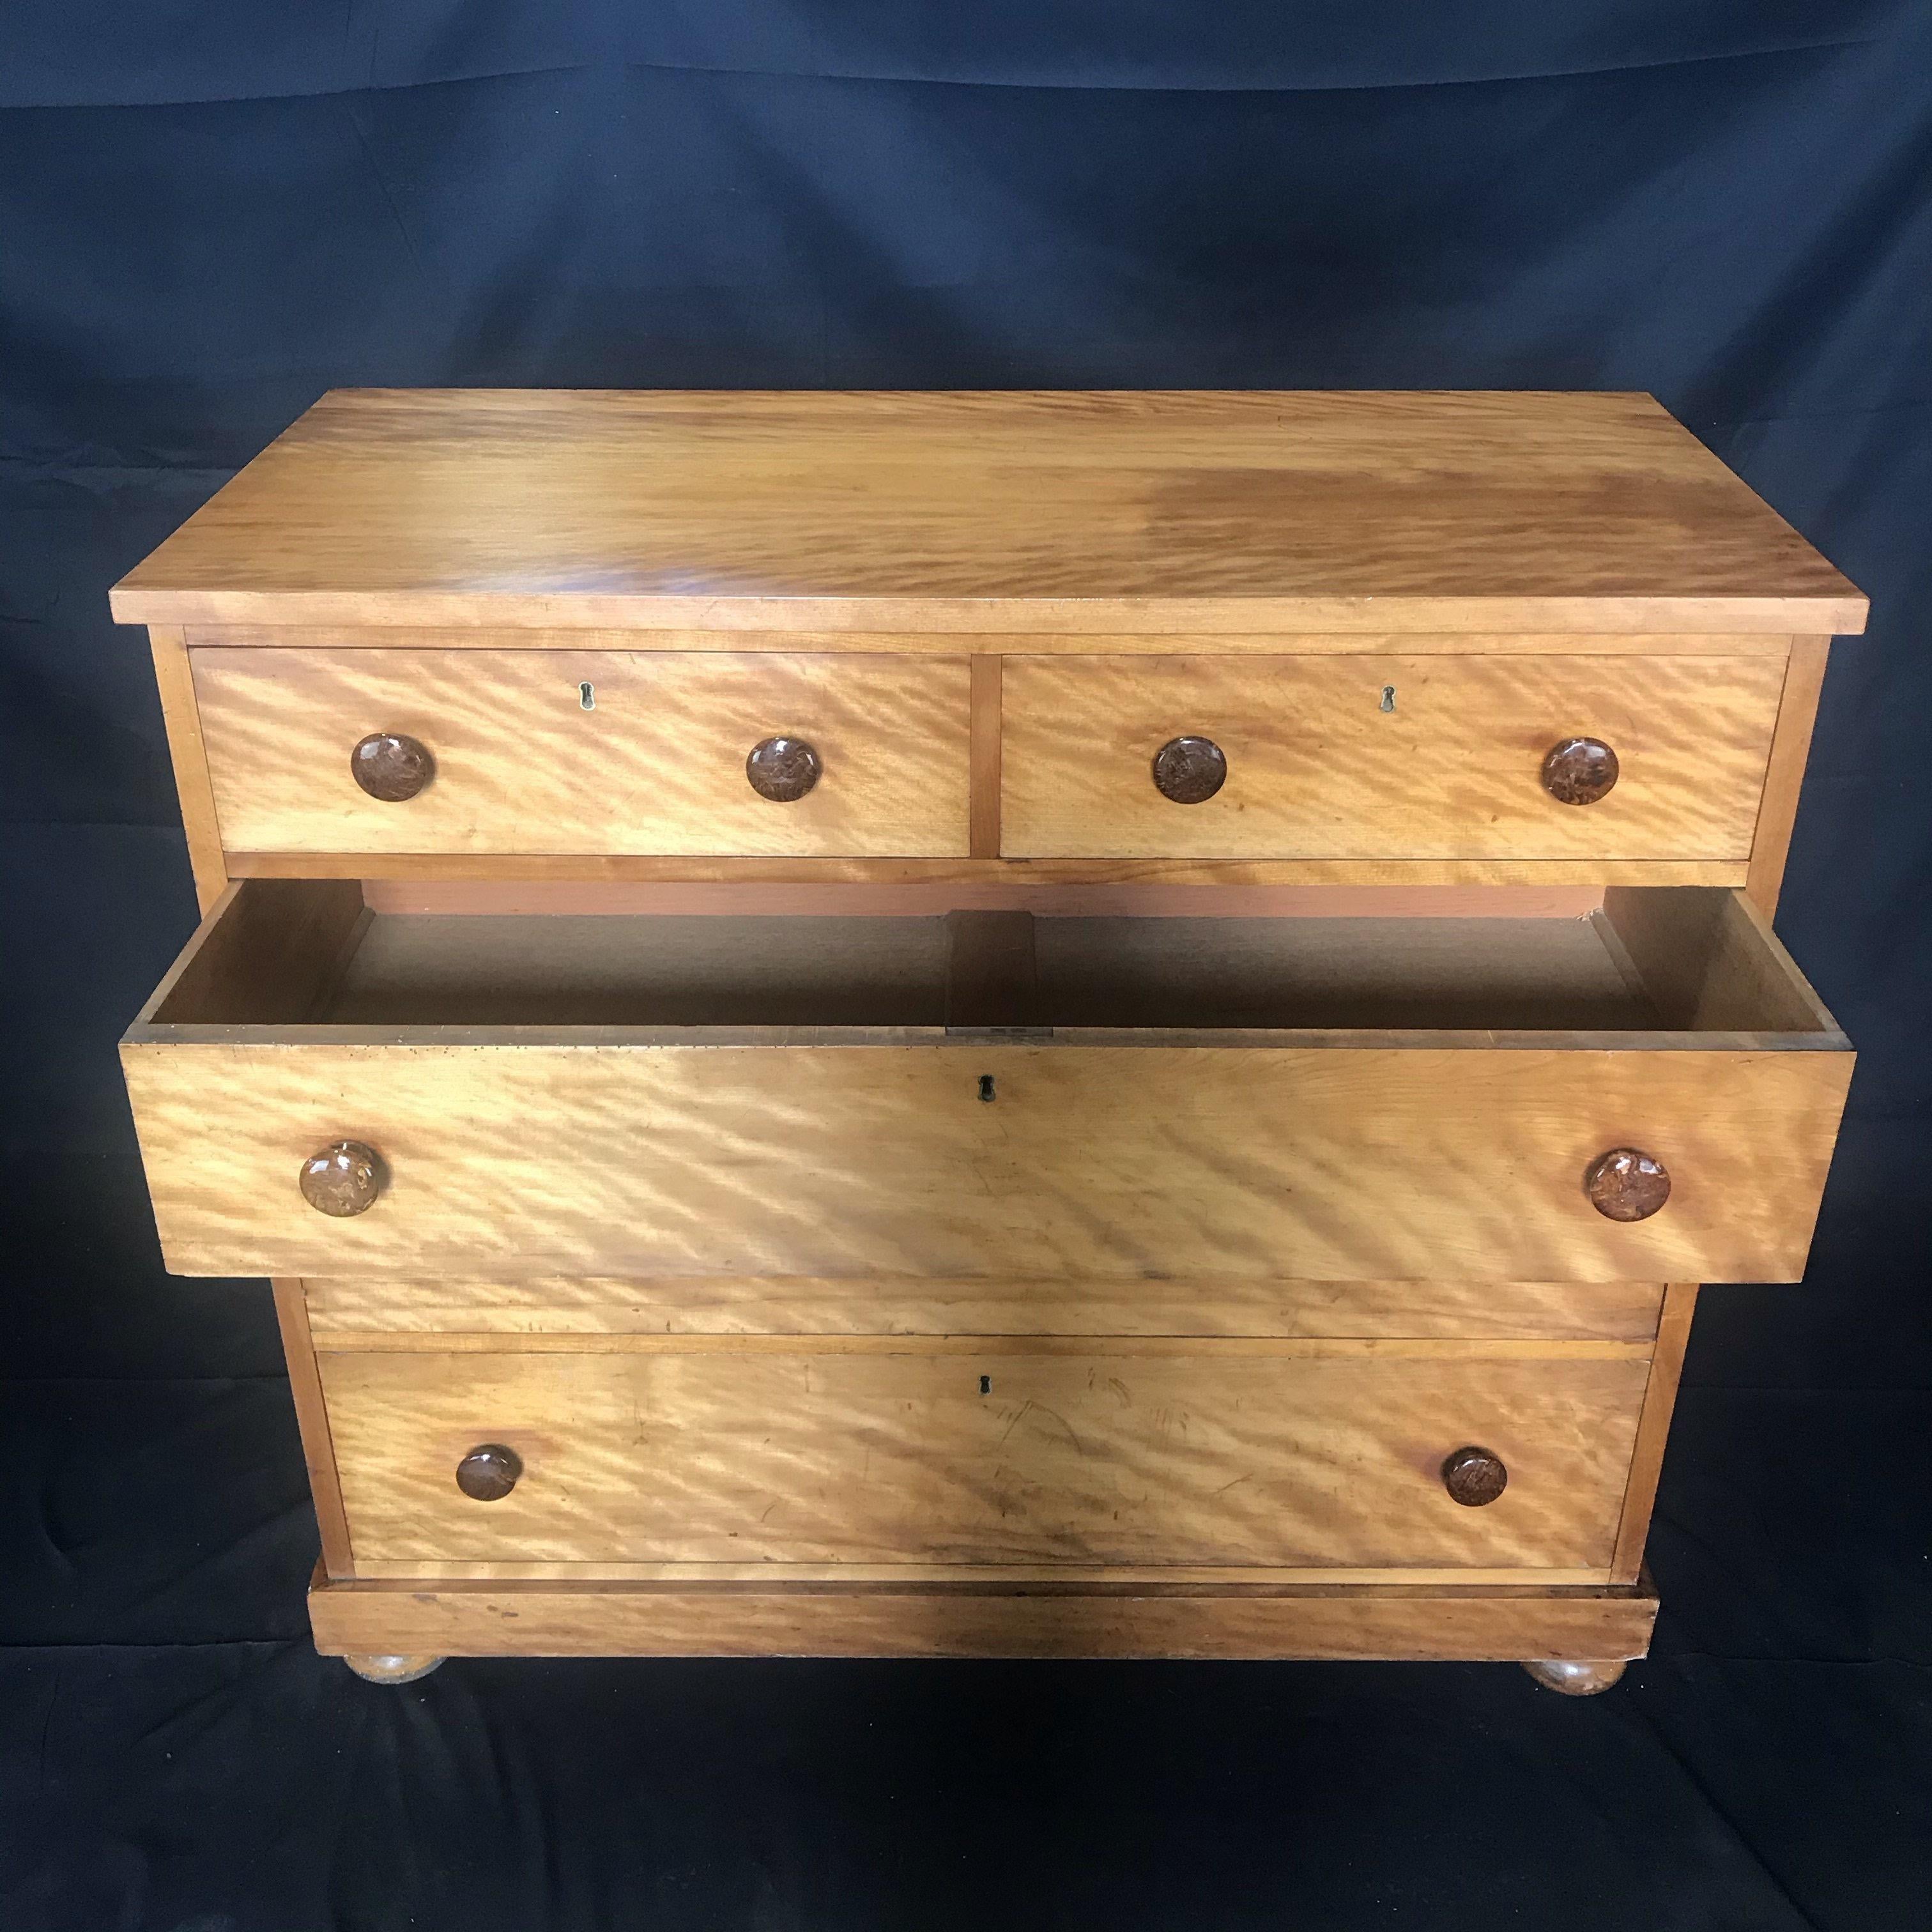 Beautifully crafted French tiger's eye maple wooden dresser having gorgeous grain and handsome porcelain drawer pulls. There are two smaller drawers on top of 3 roomy ones, all smoothly functional. Wood is almost iridescent - gorgeous!
#3569.